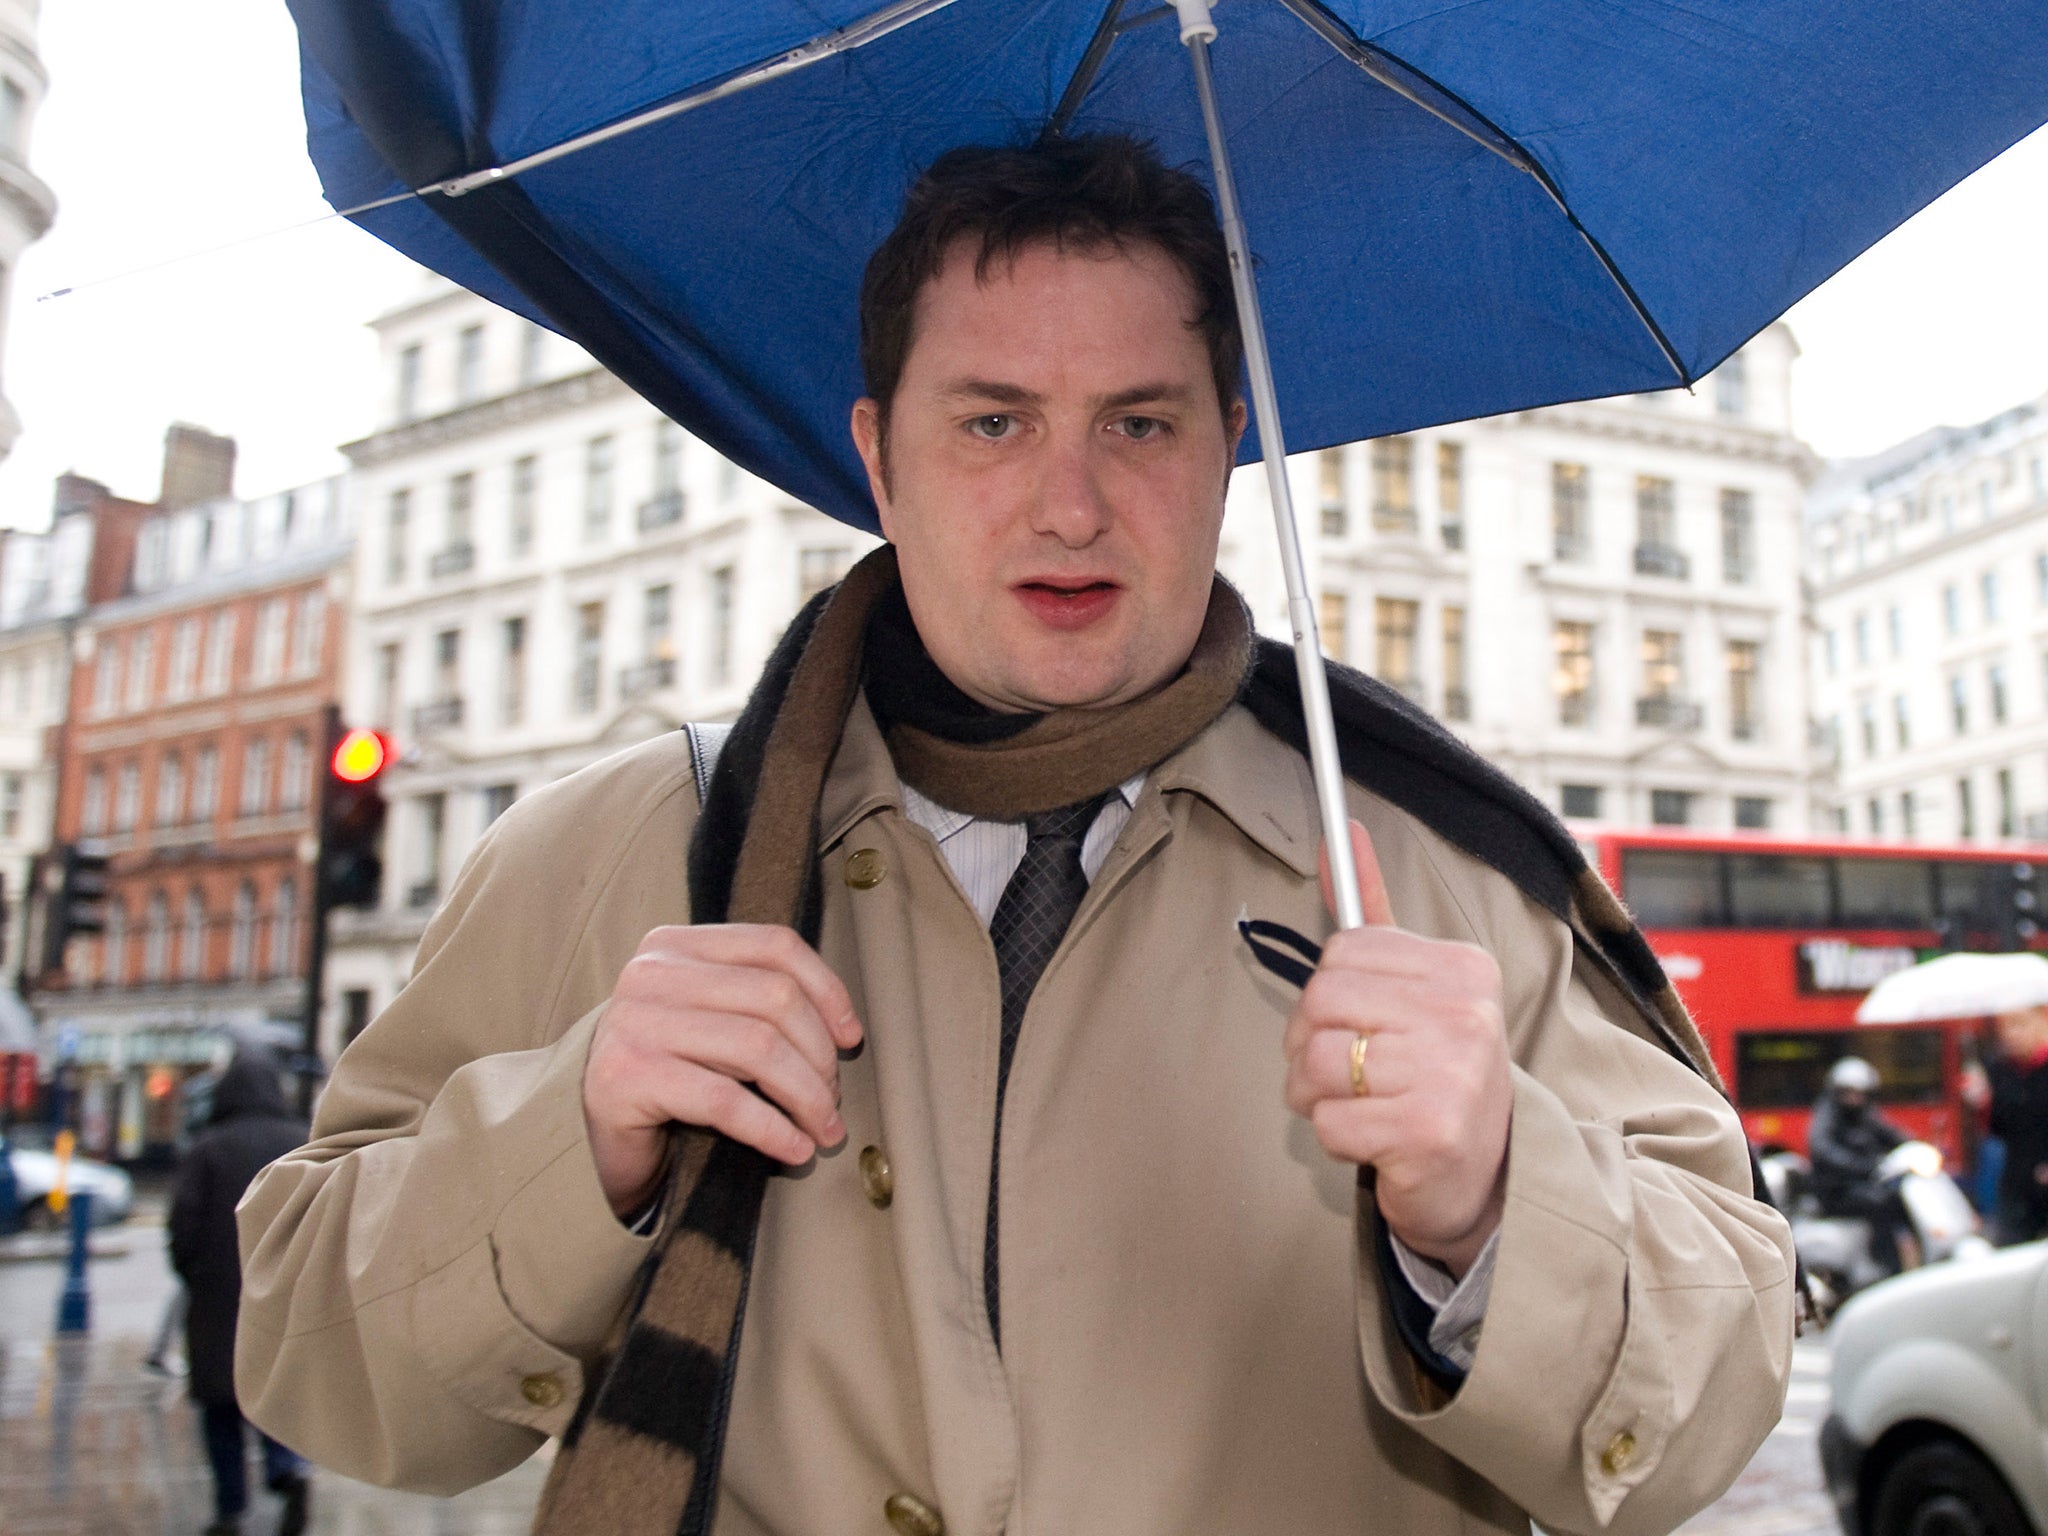 Dr. Adam Osborne, brother of Shadow Chancellor George Osborne, arrives at Liberty House for his grilling by the GMC in 2010